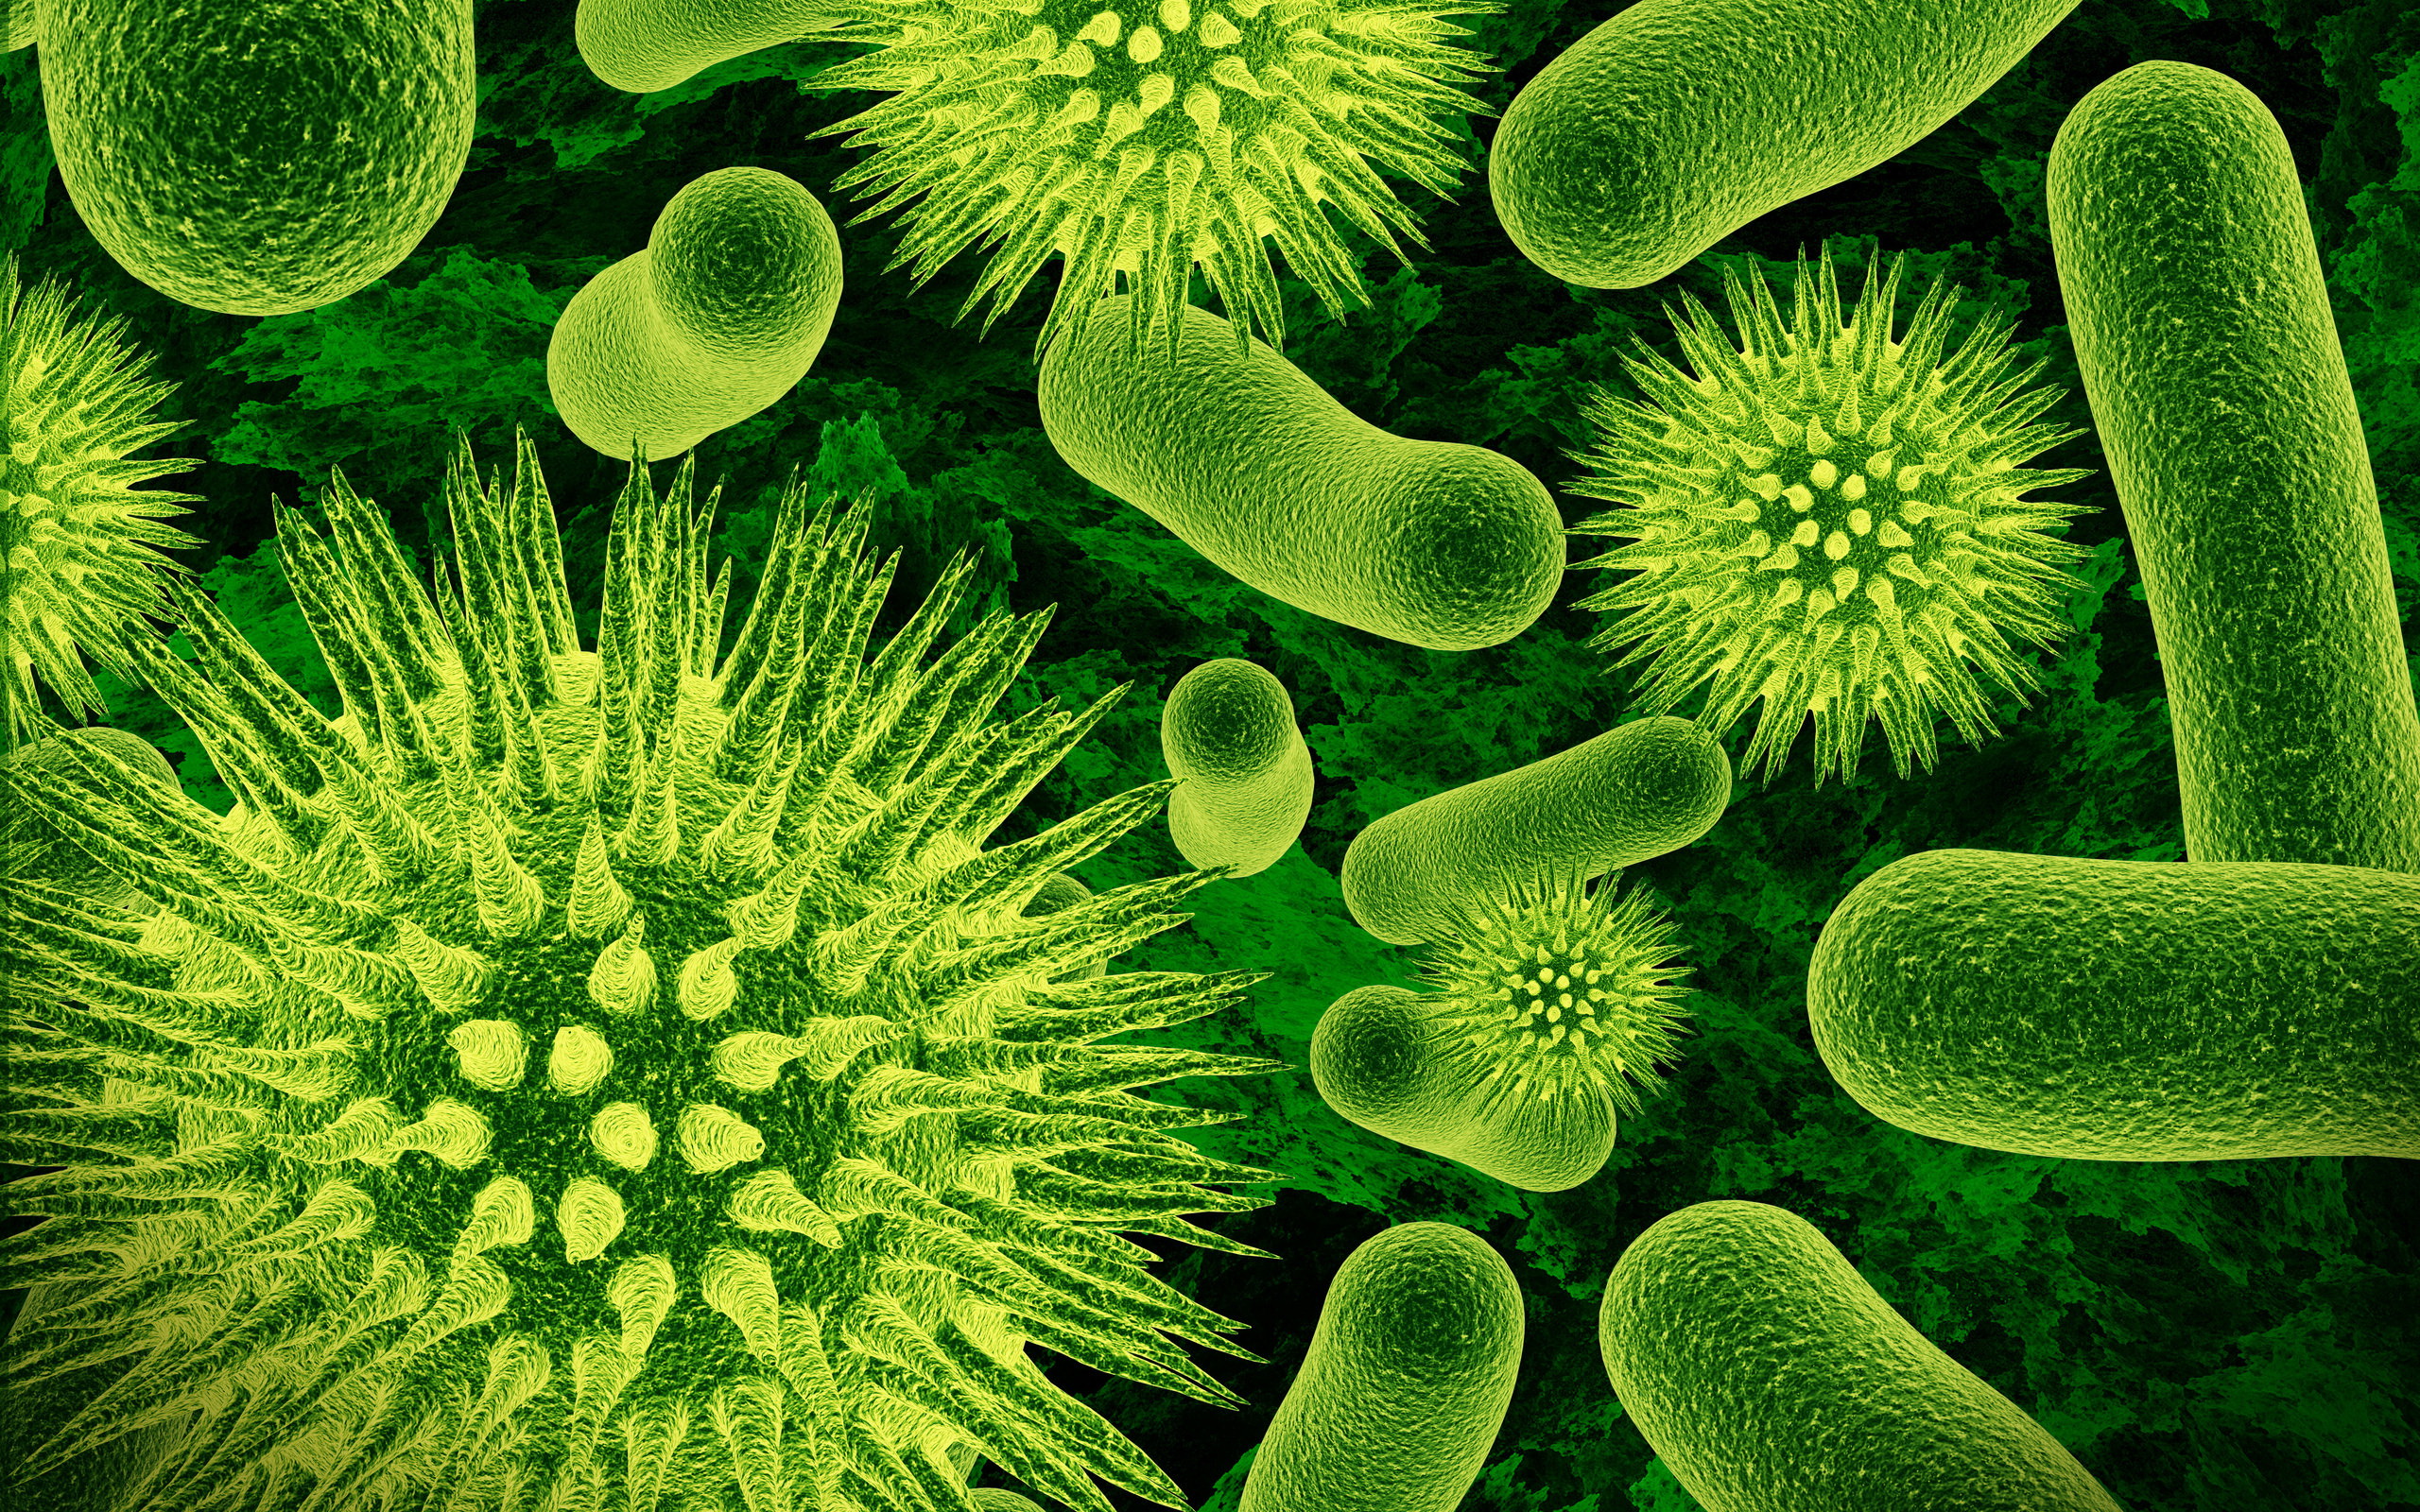 Bacteria Nanoschematic Wallpaper Pictures In High Definition